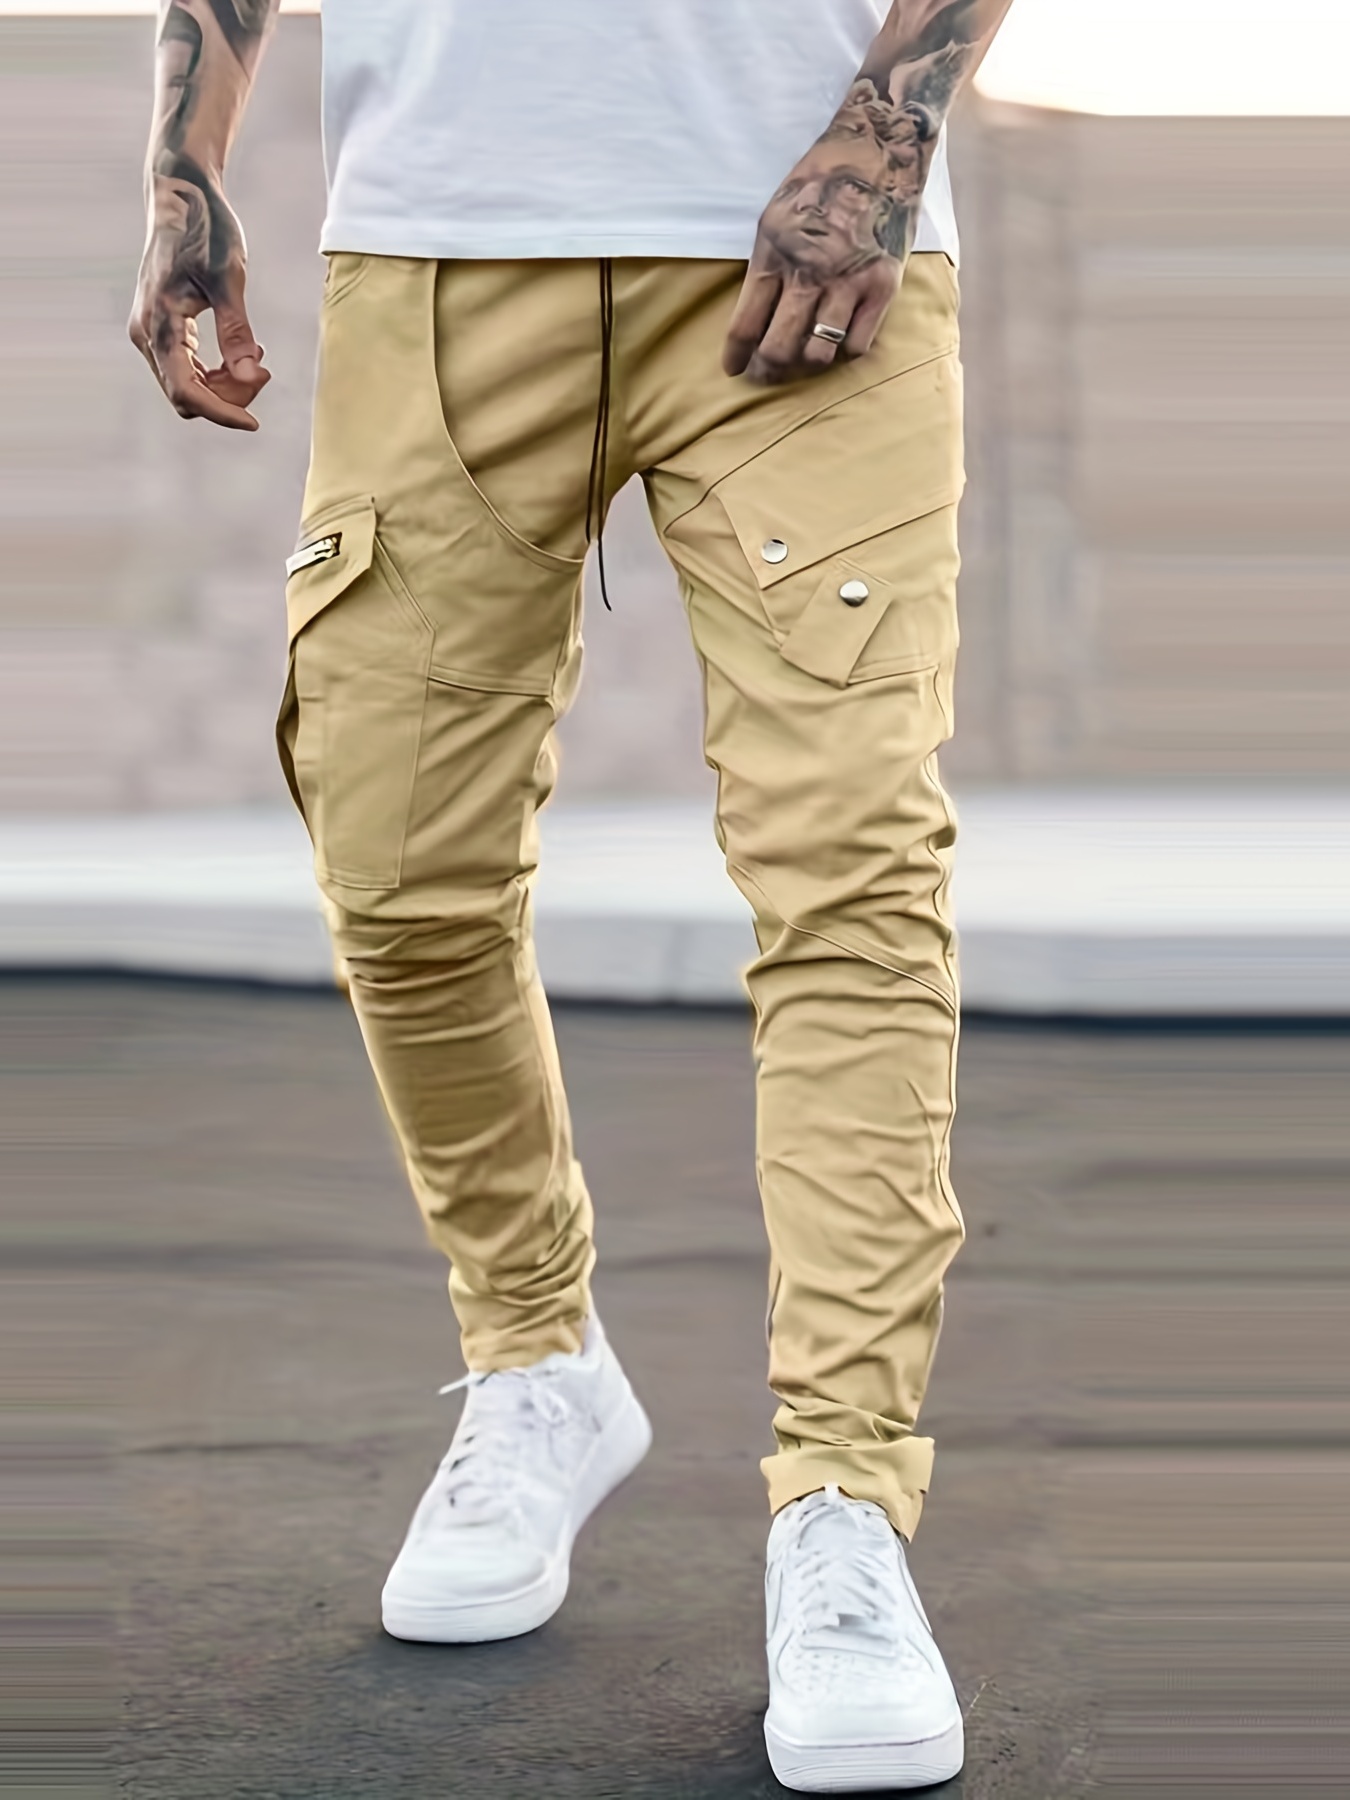 Cameland Men's Cargo Trousers Solid Color Zipper Work Wear Cargo Pockets  Full Pants Casual Stylish Wearing